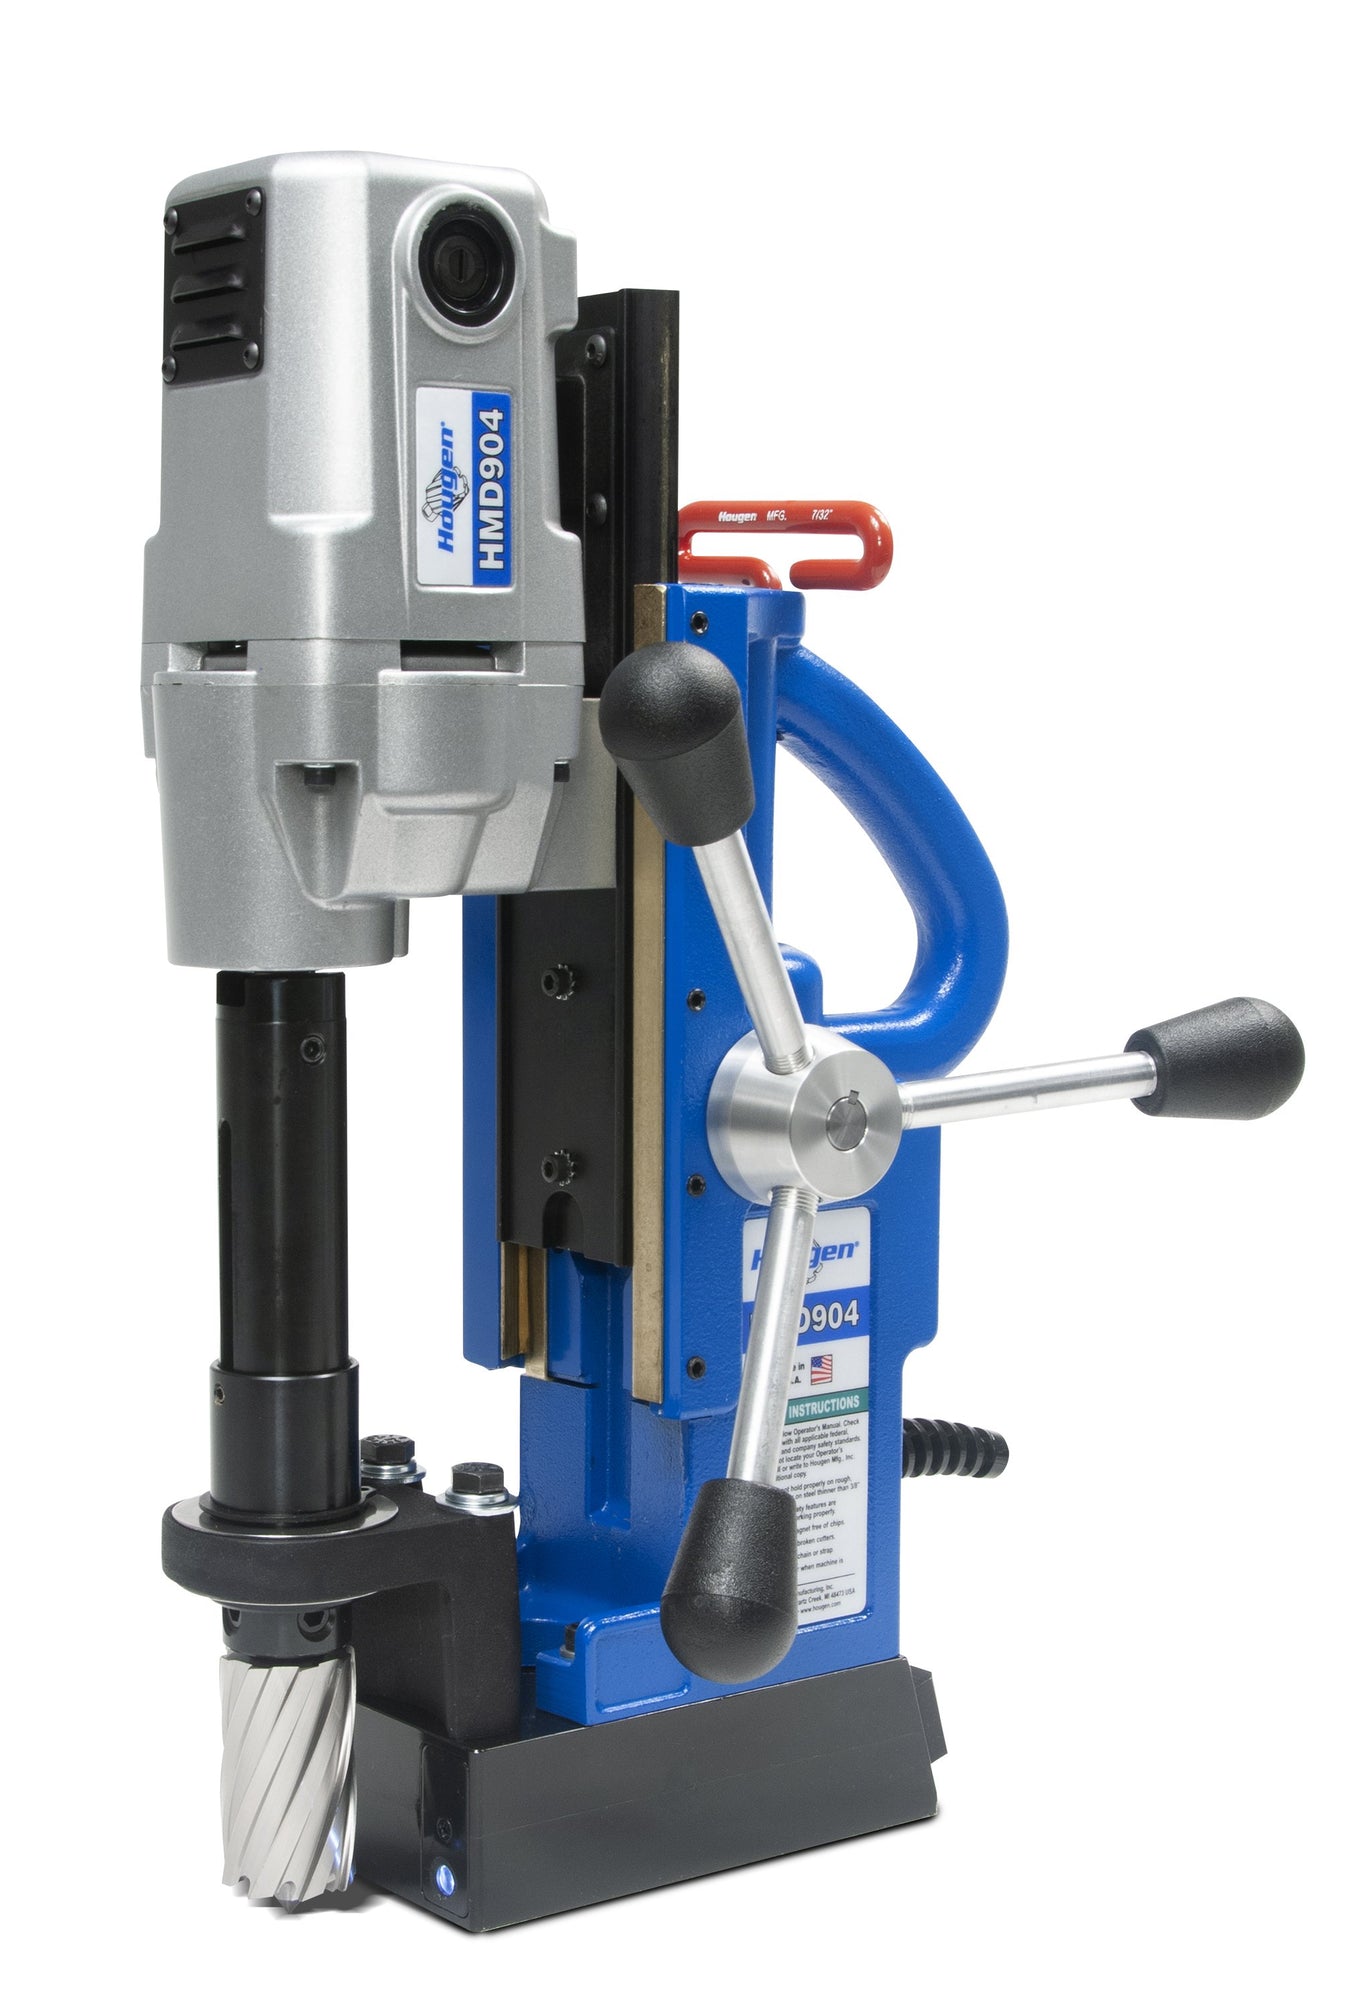 Hougen HMD904 Magnetic Drills - The mag drill of choice for fabrication